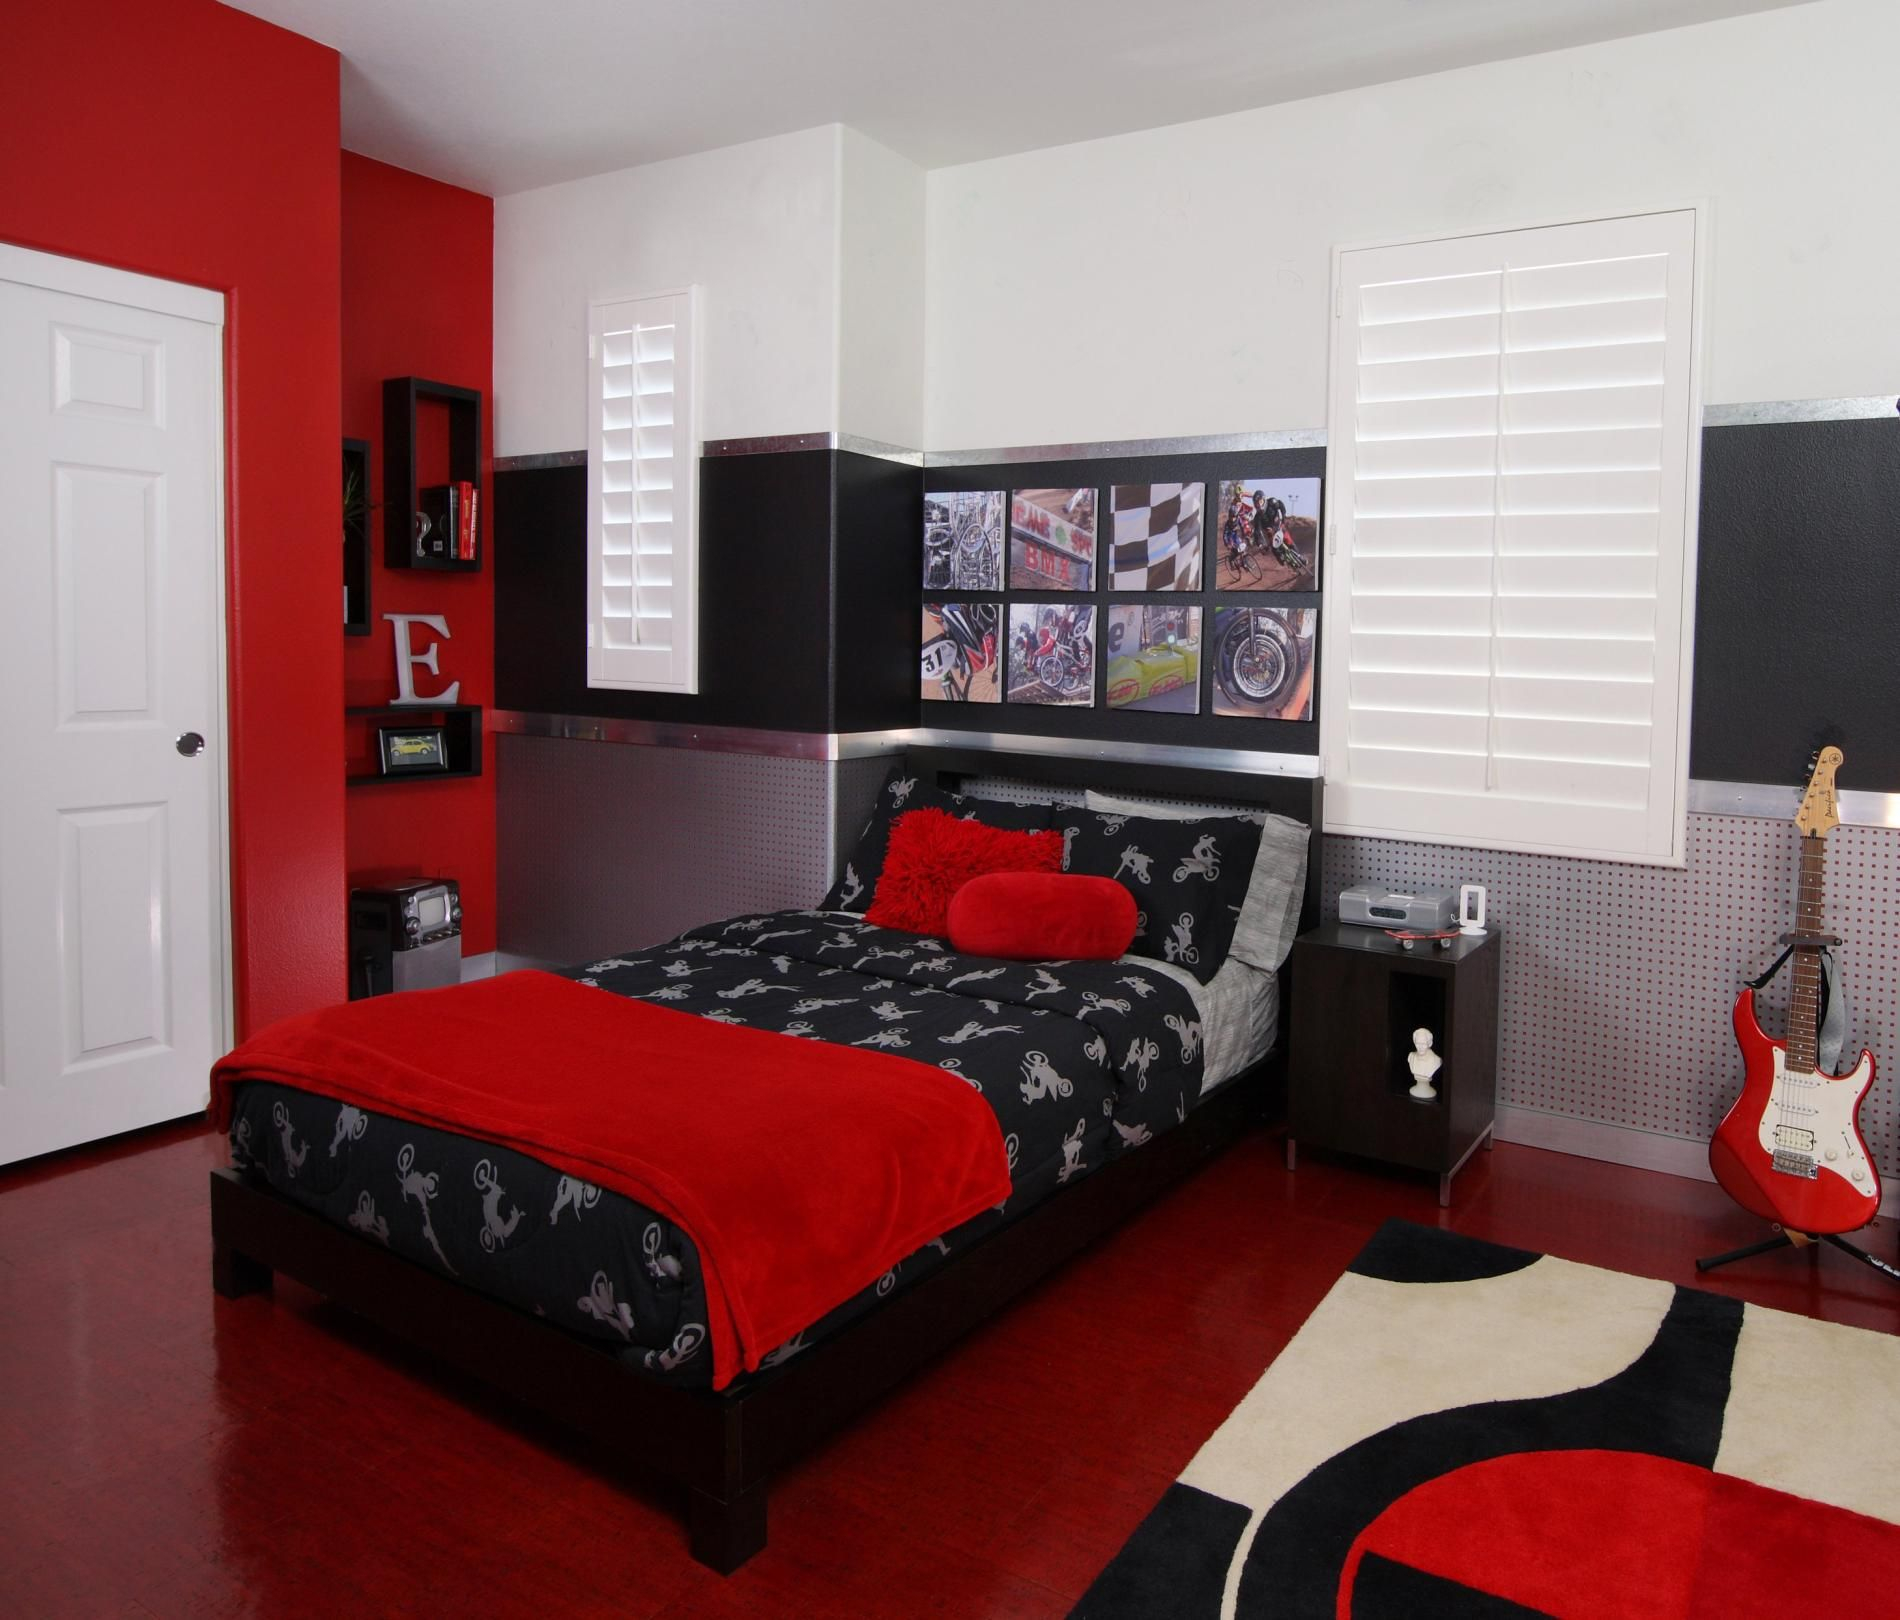 Enchanting Cool Room Ideas For Teenagers With Black Double Bed And pertaining to dimensions 1900 X 1620